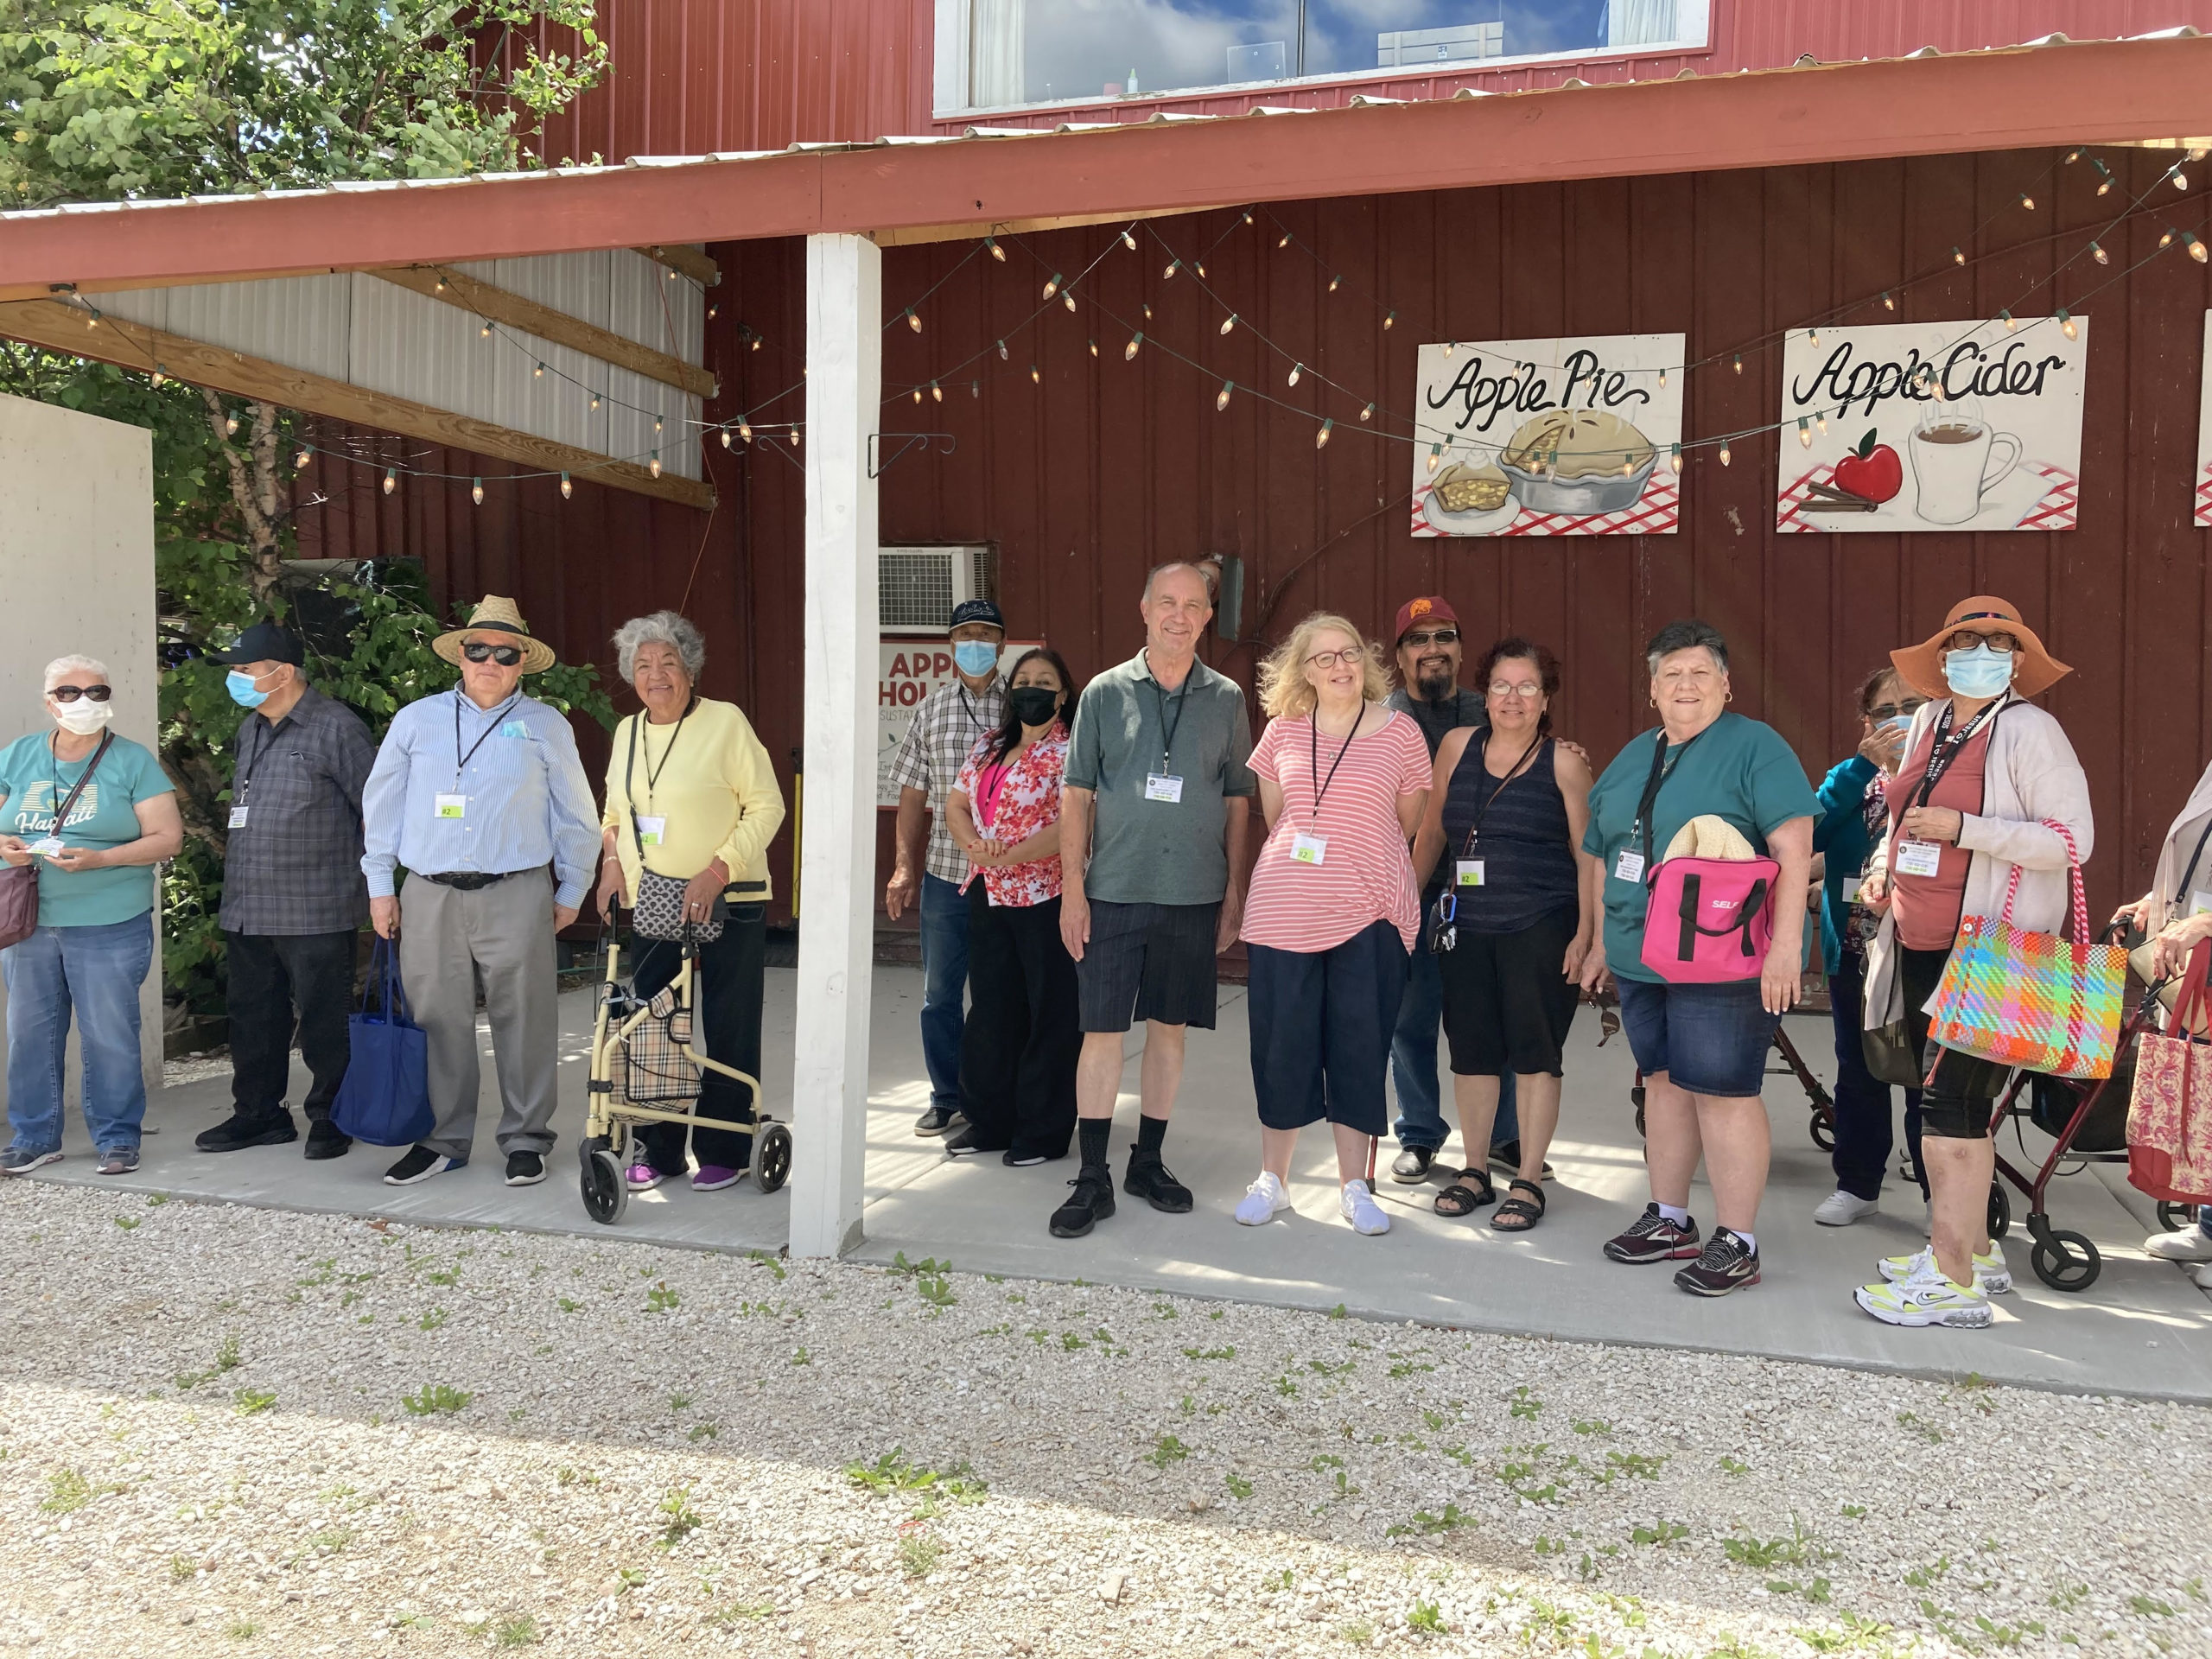 The Cicero Senior Center organized a tour of the Apple Holler Farm in Wisconsin recently to allow seniors and members of the Center to enjoy a day-long visit and the launch of the farm’s annual “Peach Picking” season.